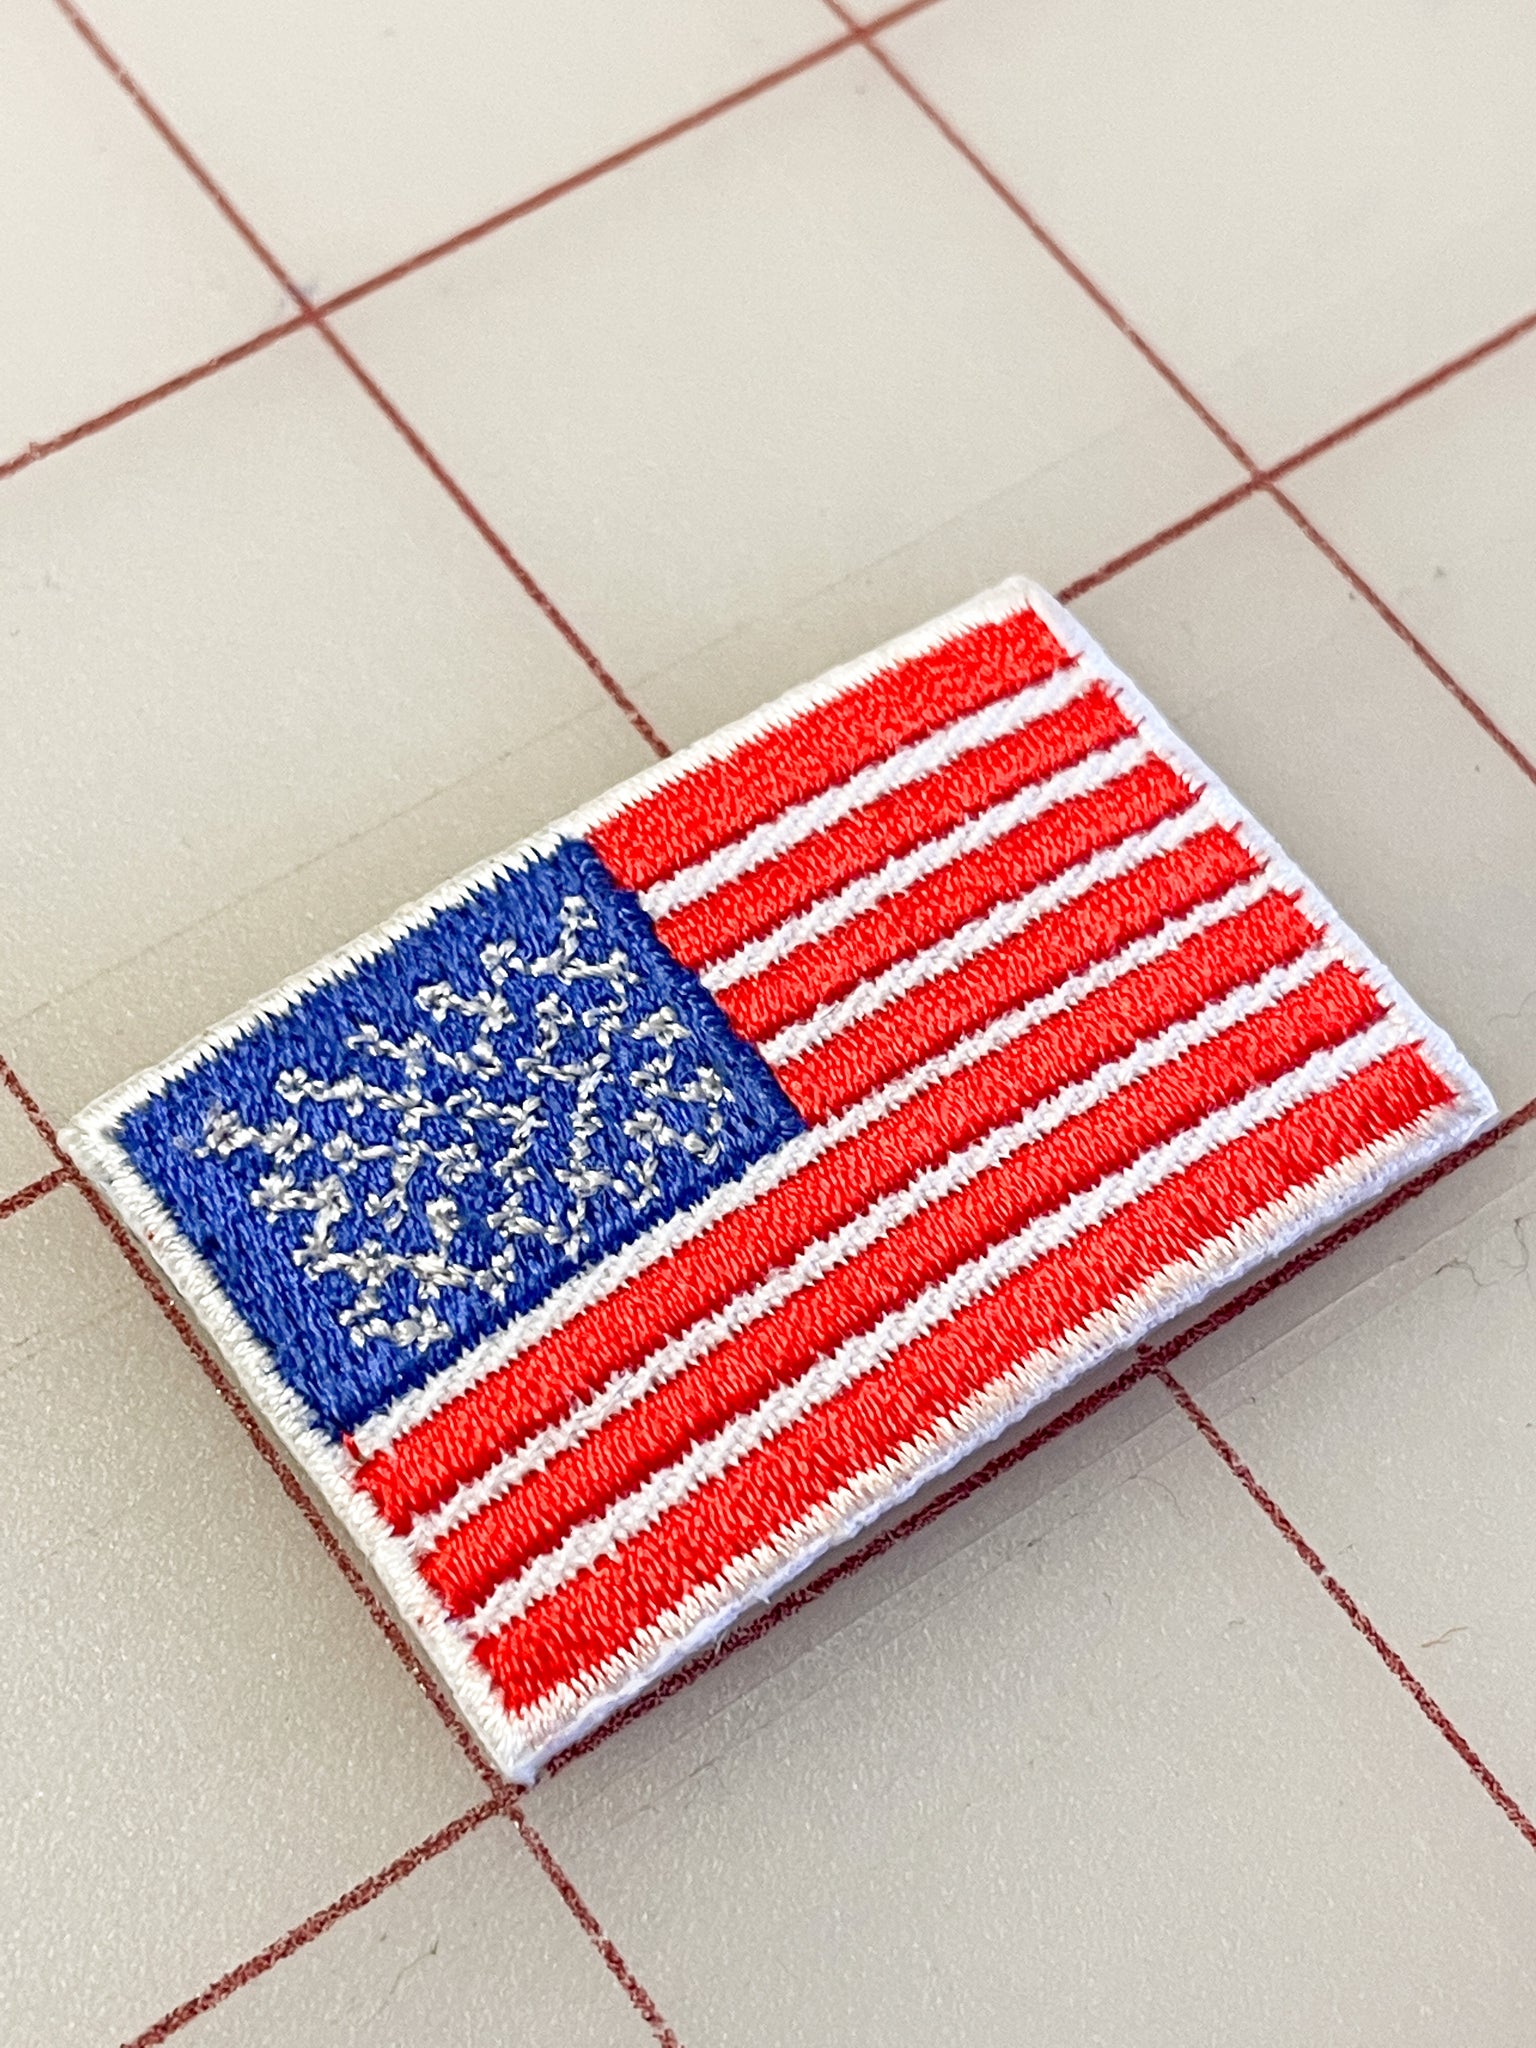 SALE Patch Embroidered - U.S.A. Flag Small